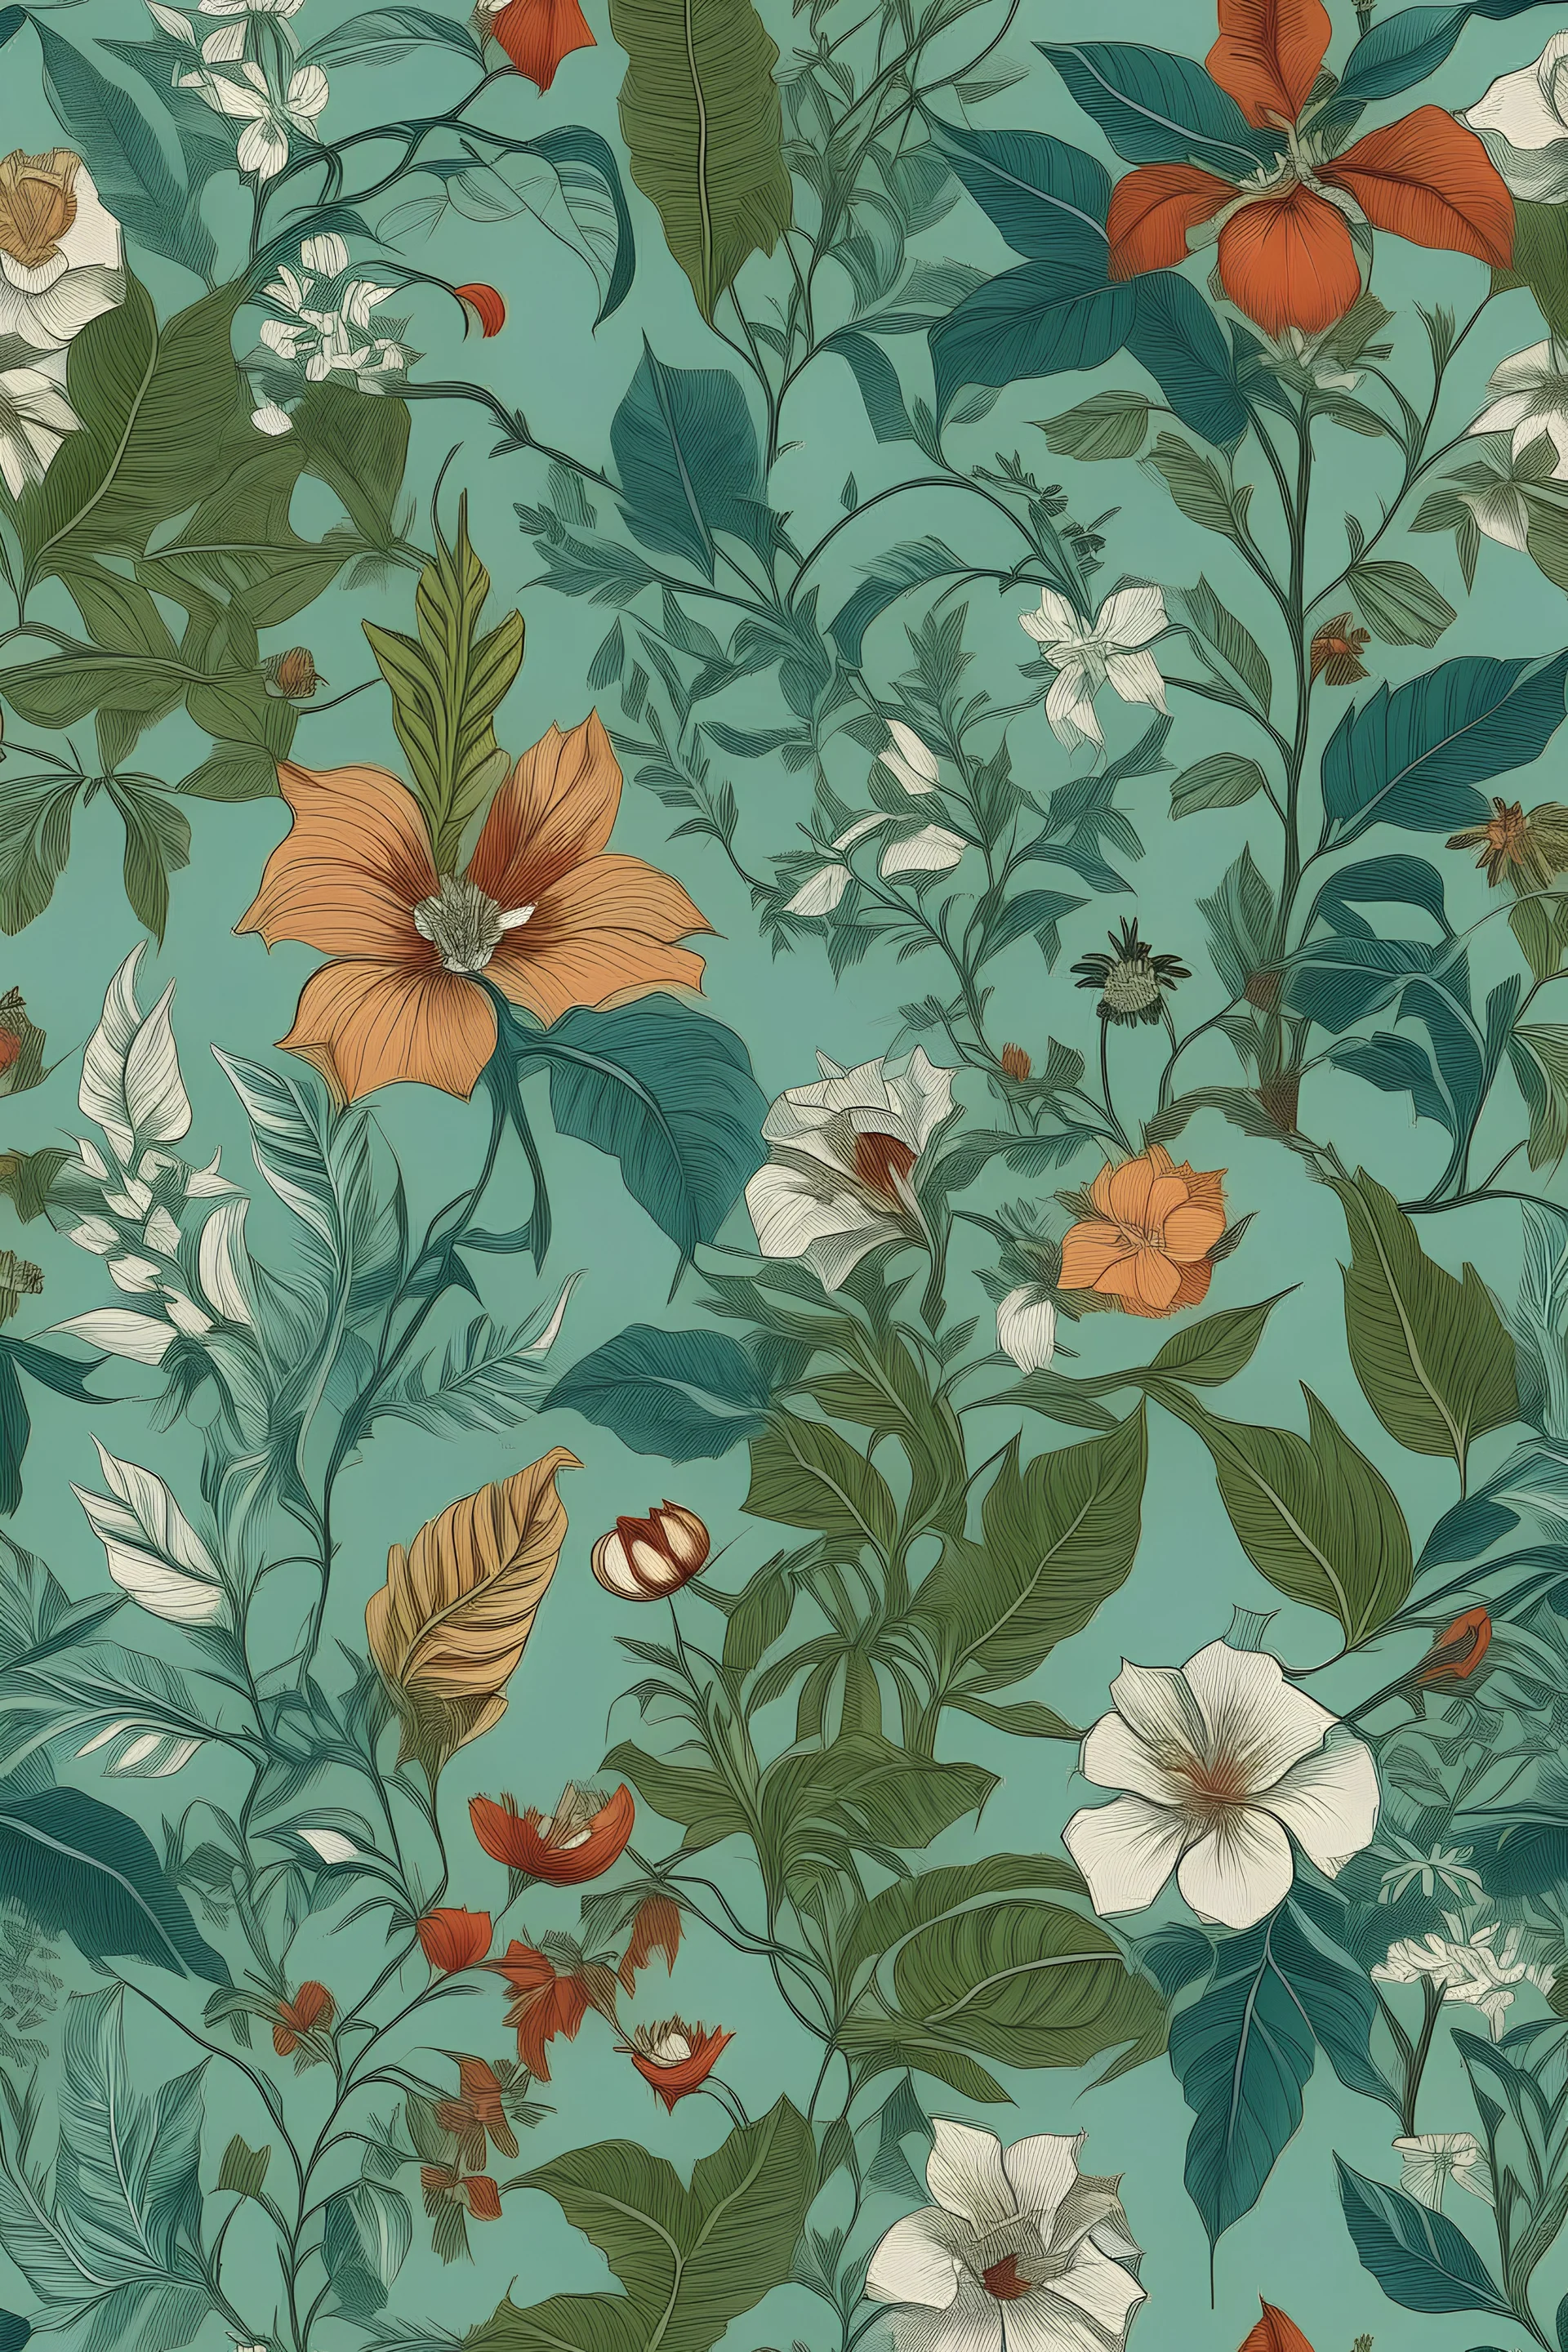 Can you create a vintage botanical illustrative realistic pattern